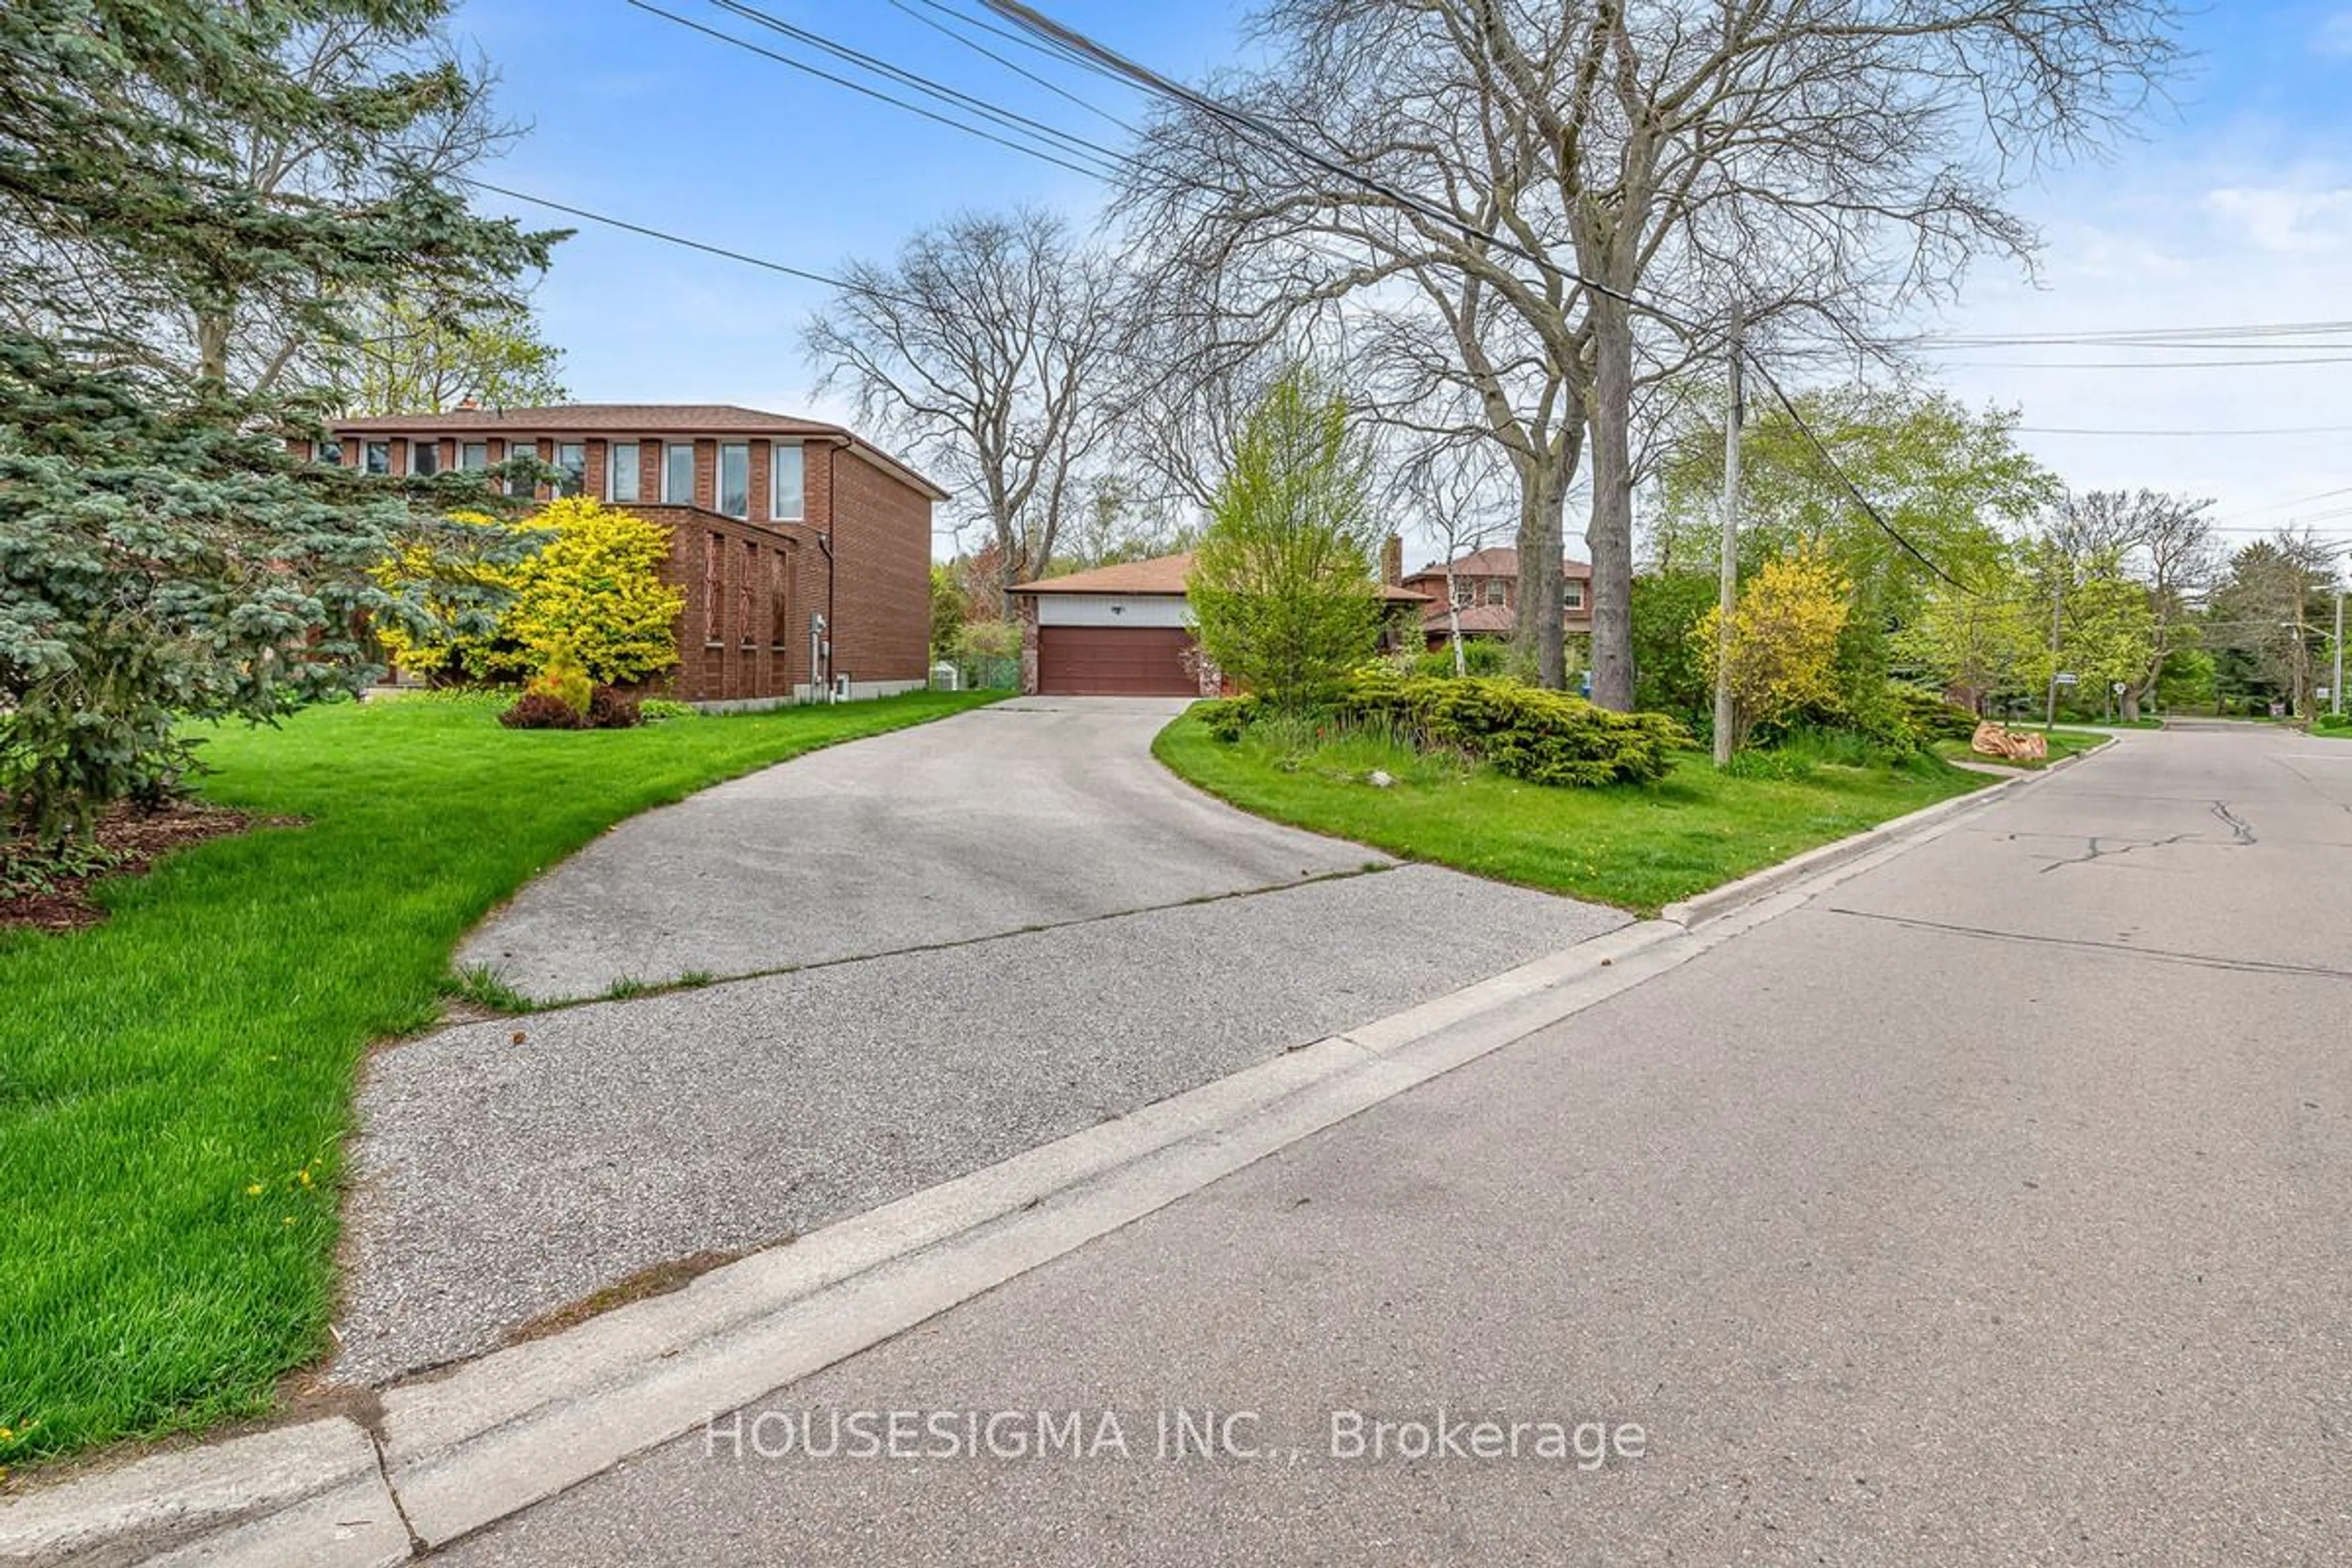 Street view for 86 Hill Cres, Toronto Ontario M1M 1J6